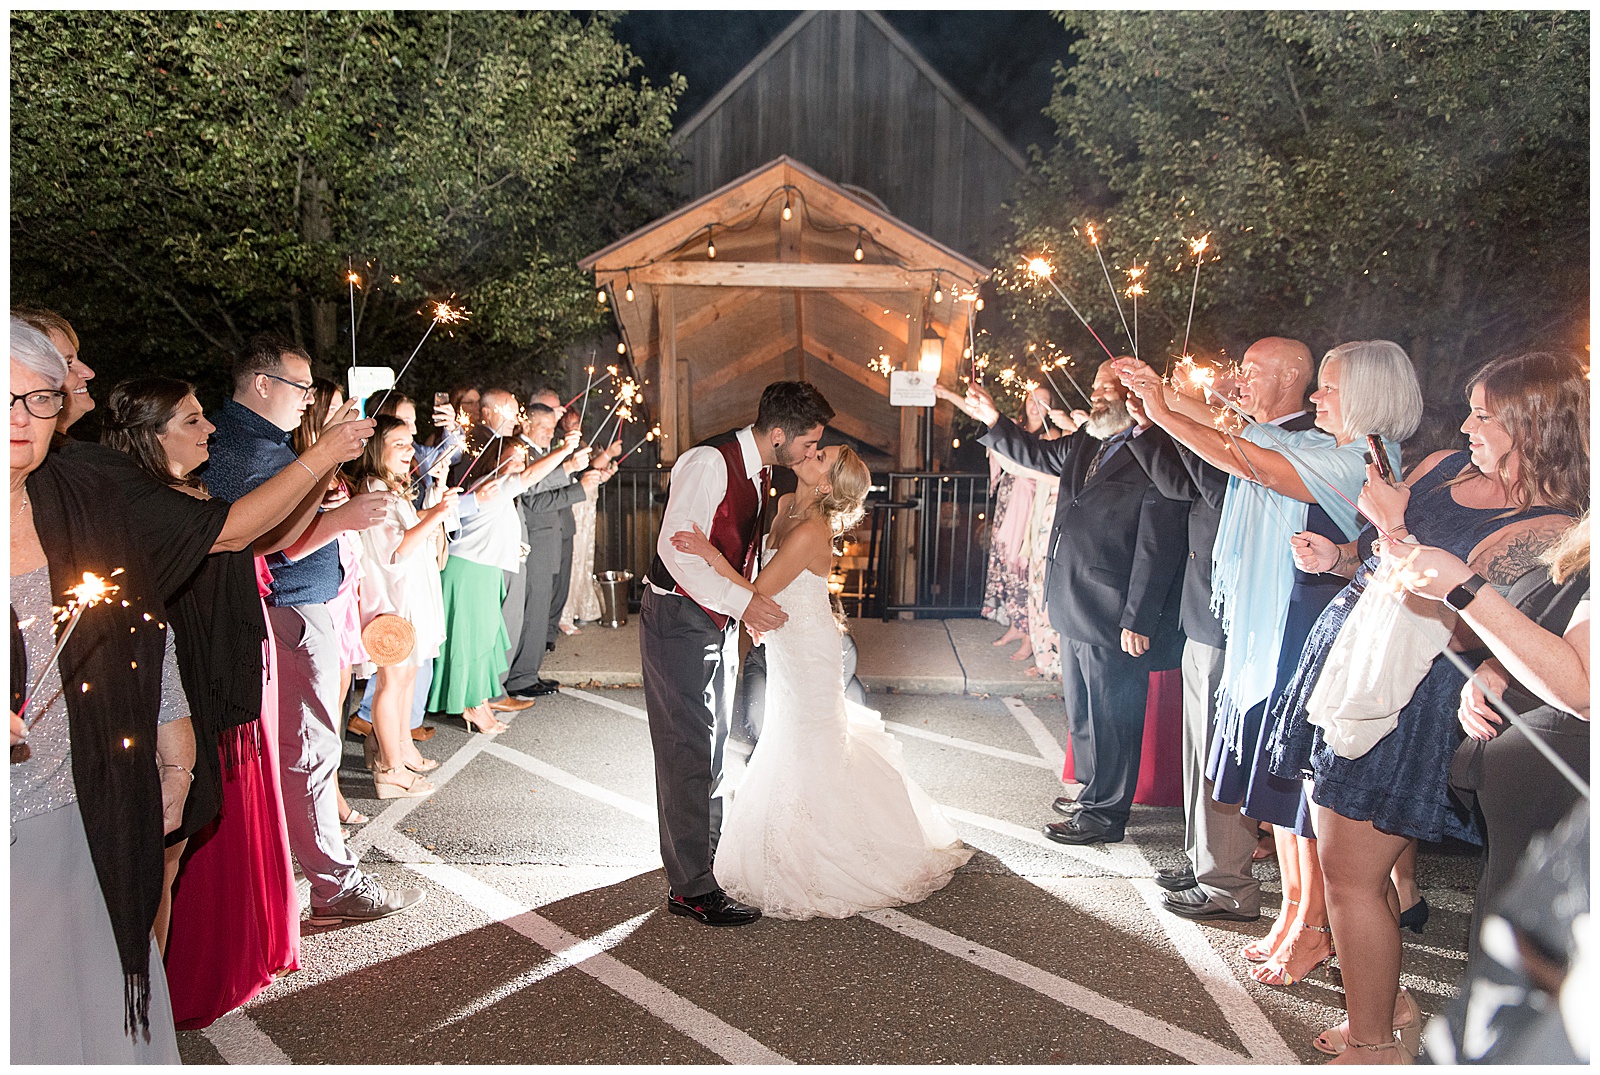 the bride and groom are kissing as they are leaving their wedding and reception and they are standing in between two long rows of guests who are extending sparklers overhead as the groom is on the left kissing his bride with a beautifully lit building and trees behind them at nighttime at Riverdale Manor in Lancaster, PA